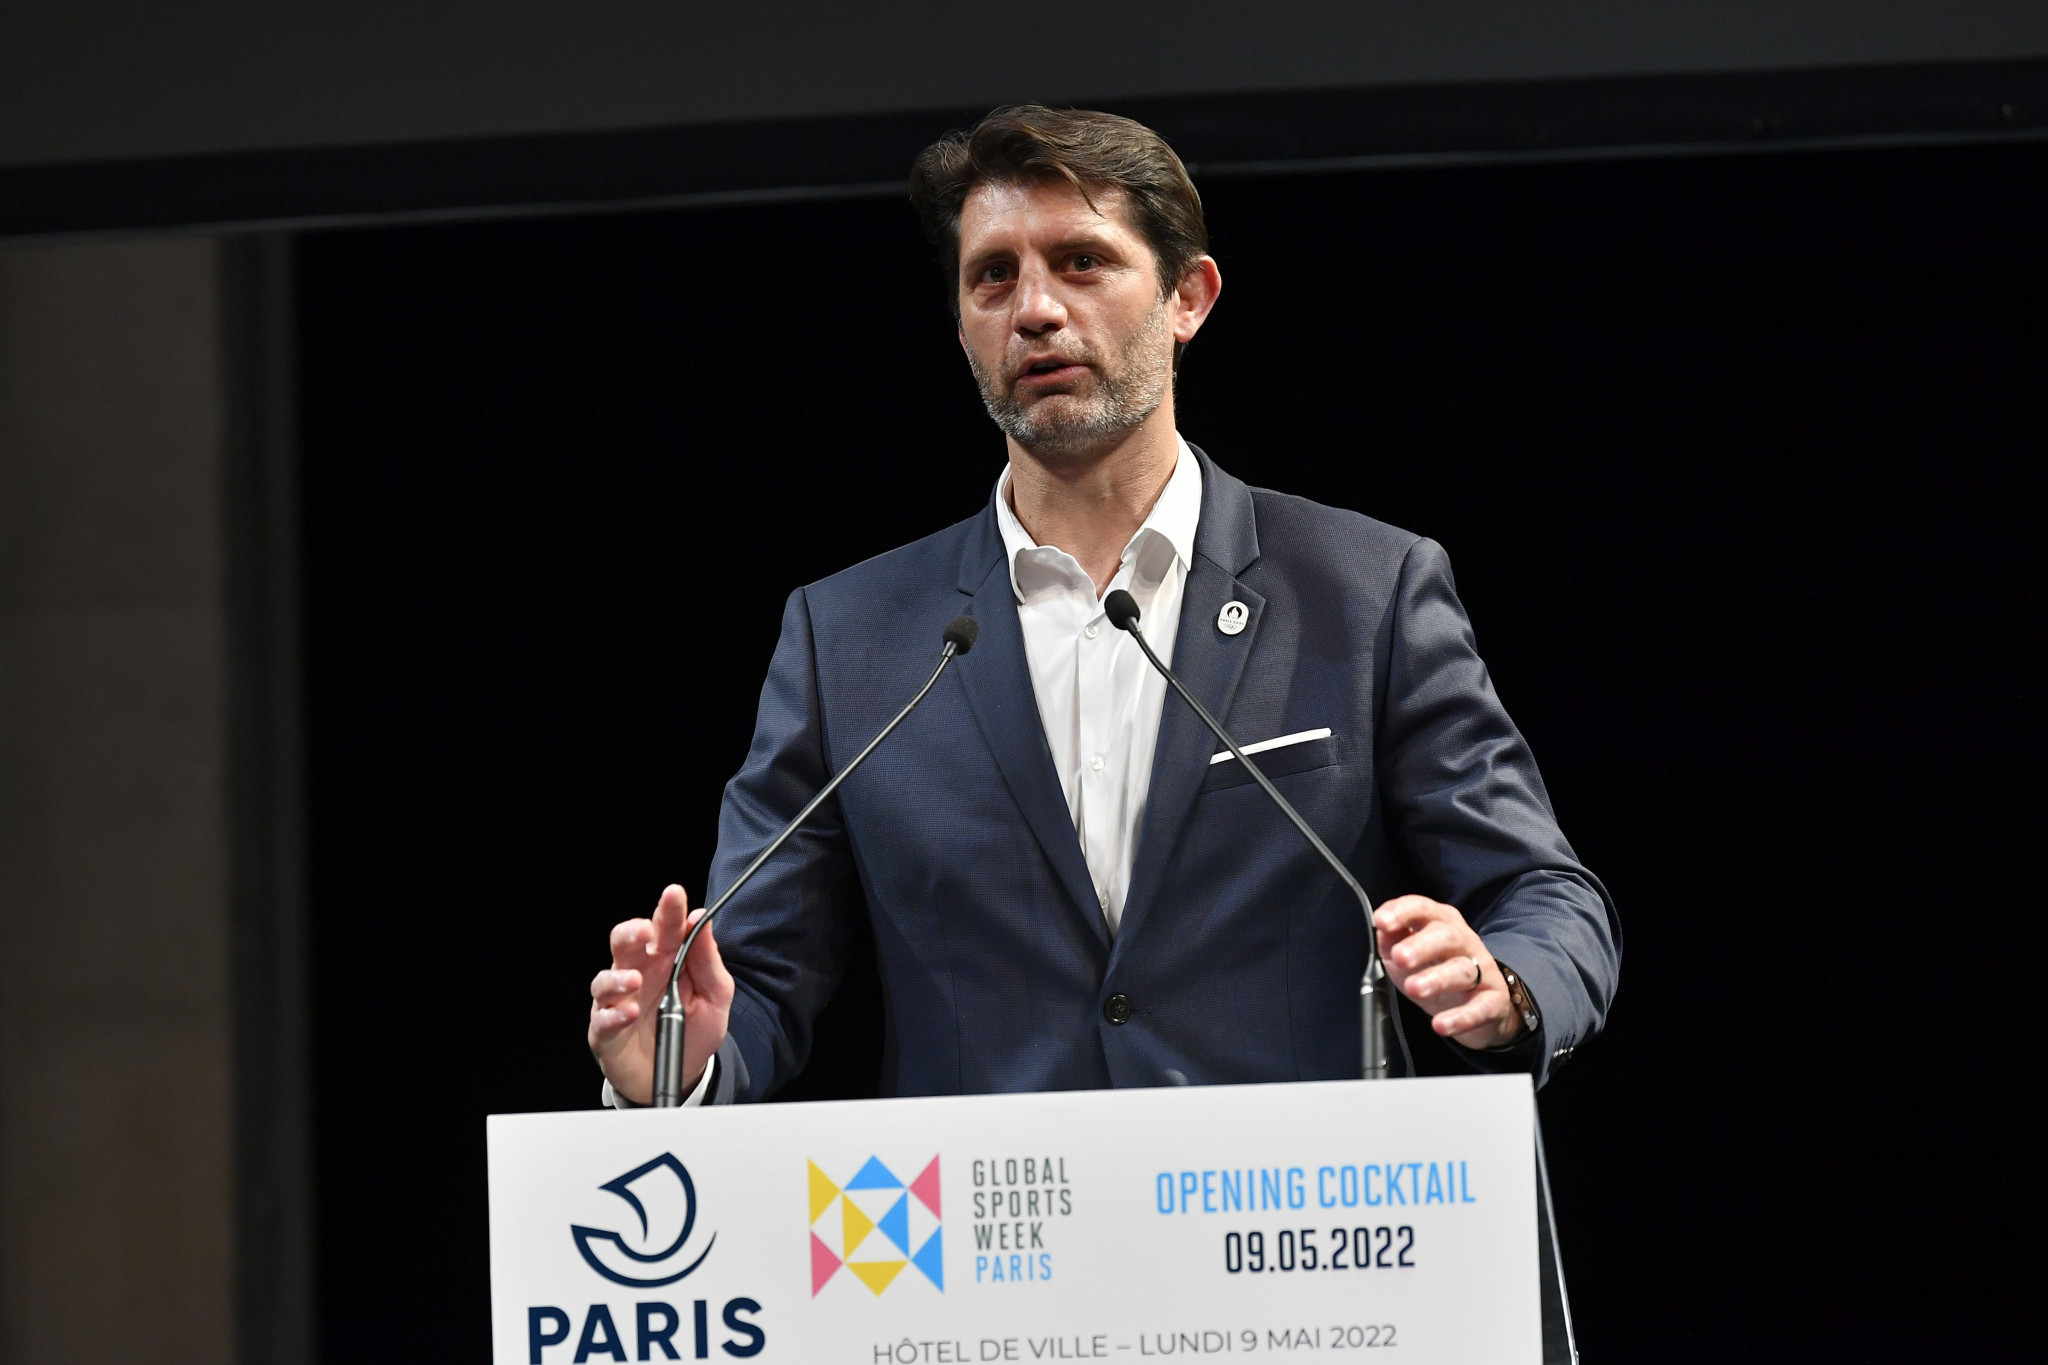 Pierre Rabadan, Paris Deputy Mayor in charge of the Paris 2024 Olympics and Paralympics, gave a speech at the ceremony ©Getty Images